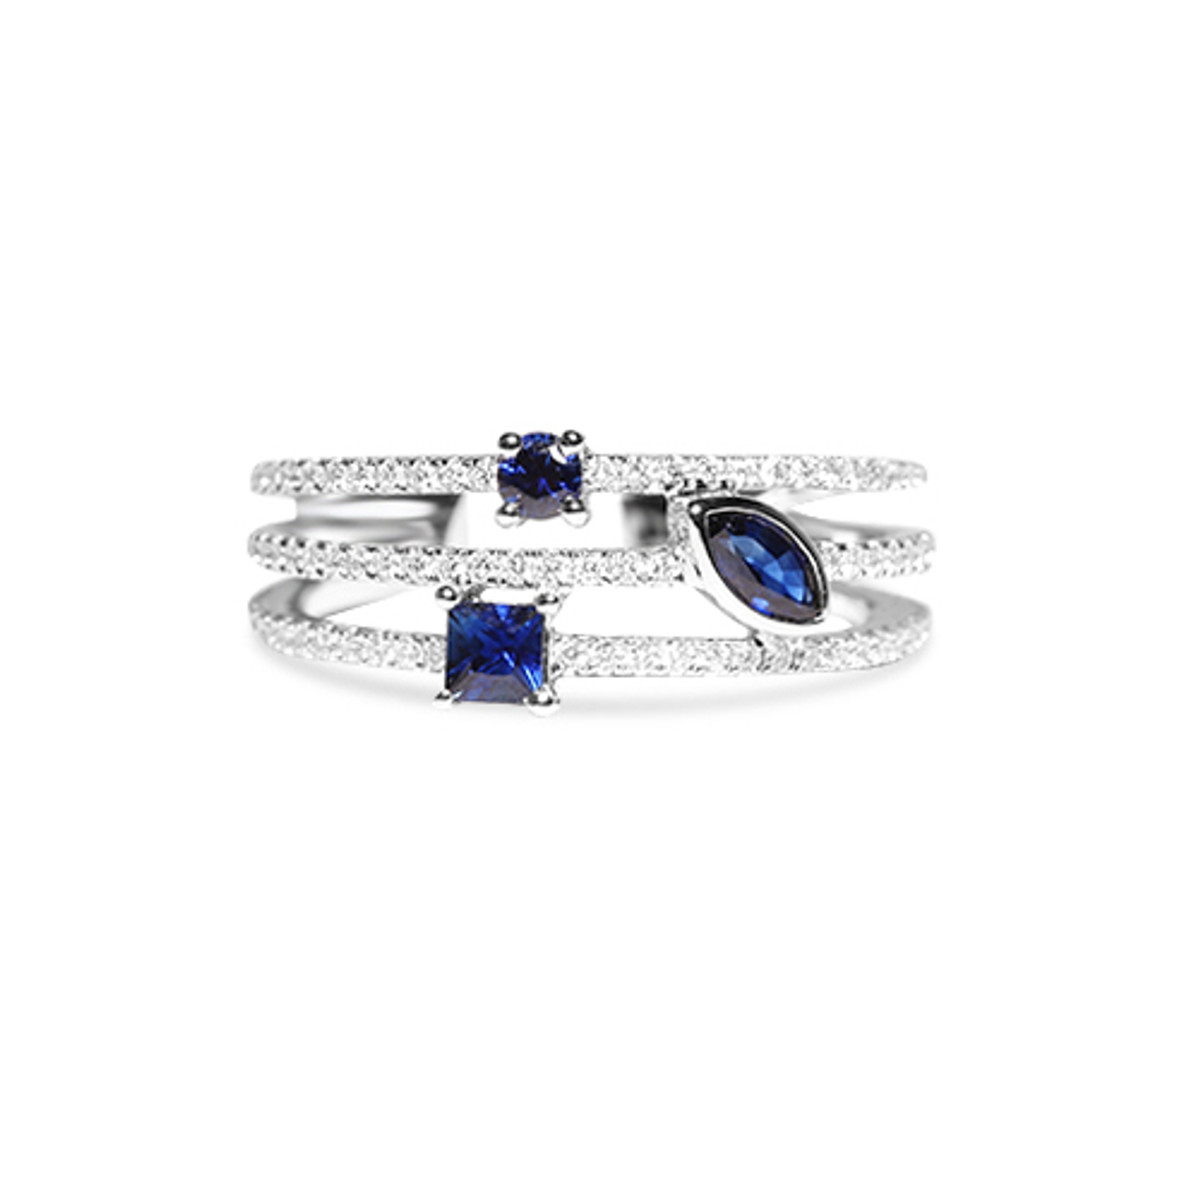 Hyde Park Collection 14K White Gold Diamond Sapphire 3 Row Ring-23491